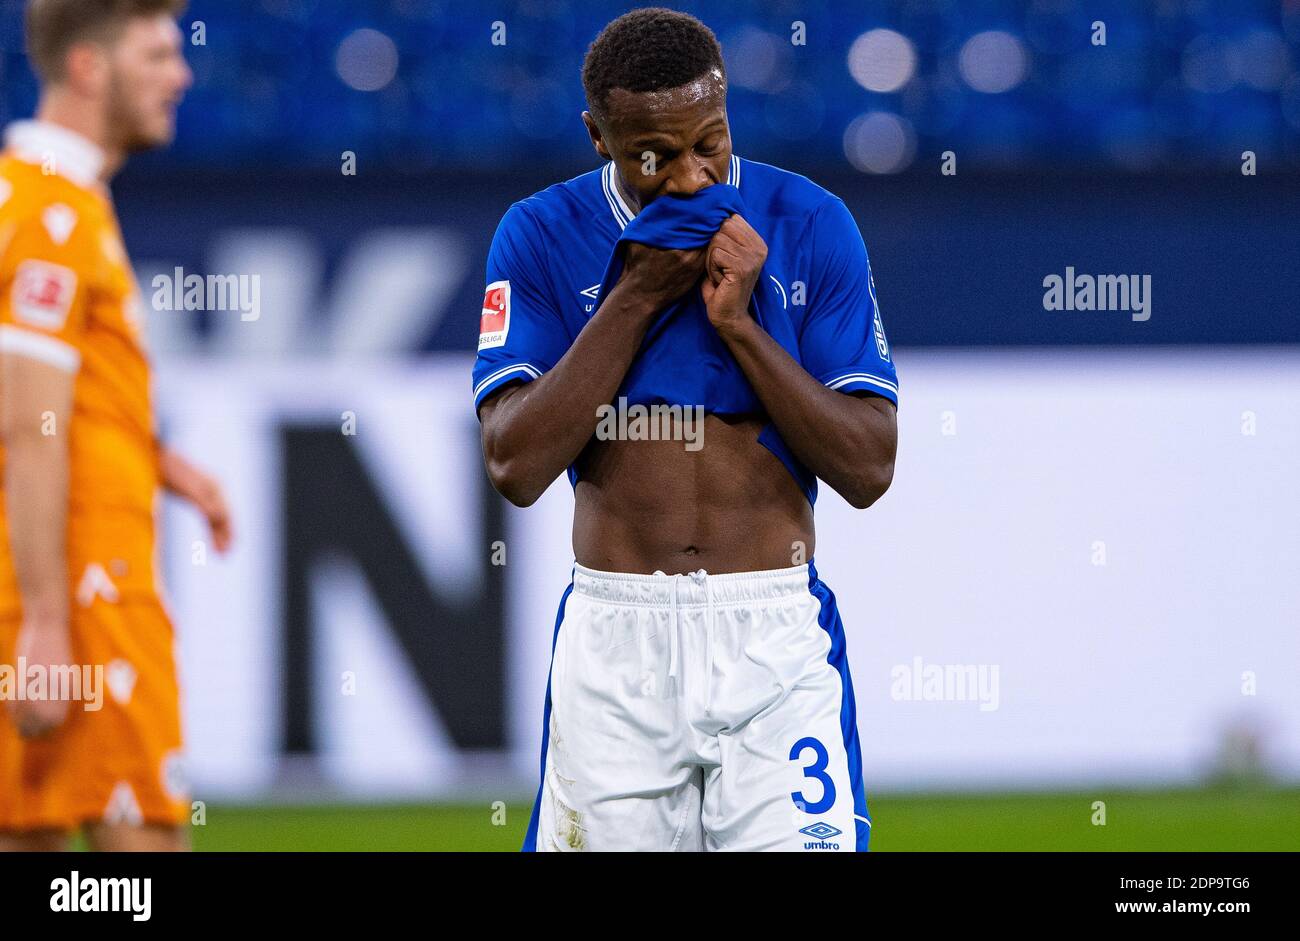 Gelsenkirchen, Germany. 19th Dec, 2020. Football: Bundesliga, FC Schalke 04 - Arminia Bielefeld, Matchday 13 at Veltins Arena. Schalke's Hamza Mendyl wipes the sweat from his face with his jersey. Credit: Guido Kirchner/dpa - IMPORTANT NOTE: In accordance with the regulations of the DFL Deutsche Fußball Liga and/or the DFB Deutscher Fußball-Bund, it is prohibited to use or have used photographs taken in the stadium and/or of the match in the form of sequence pictures and/or video-like photo series./dpa/Alamy Live News Stock Photo